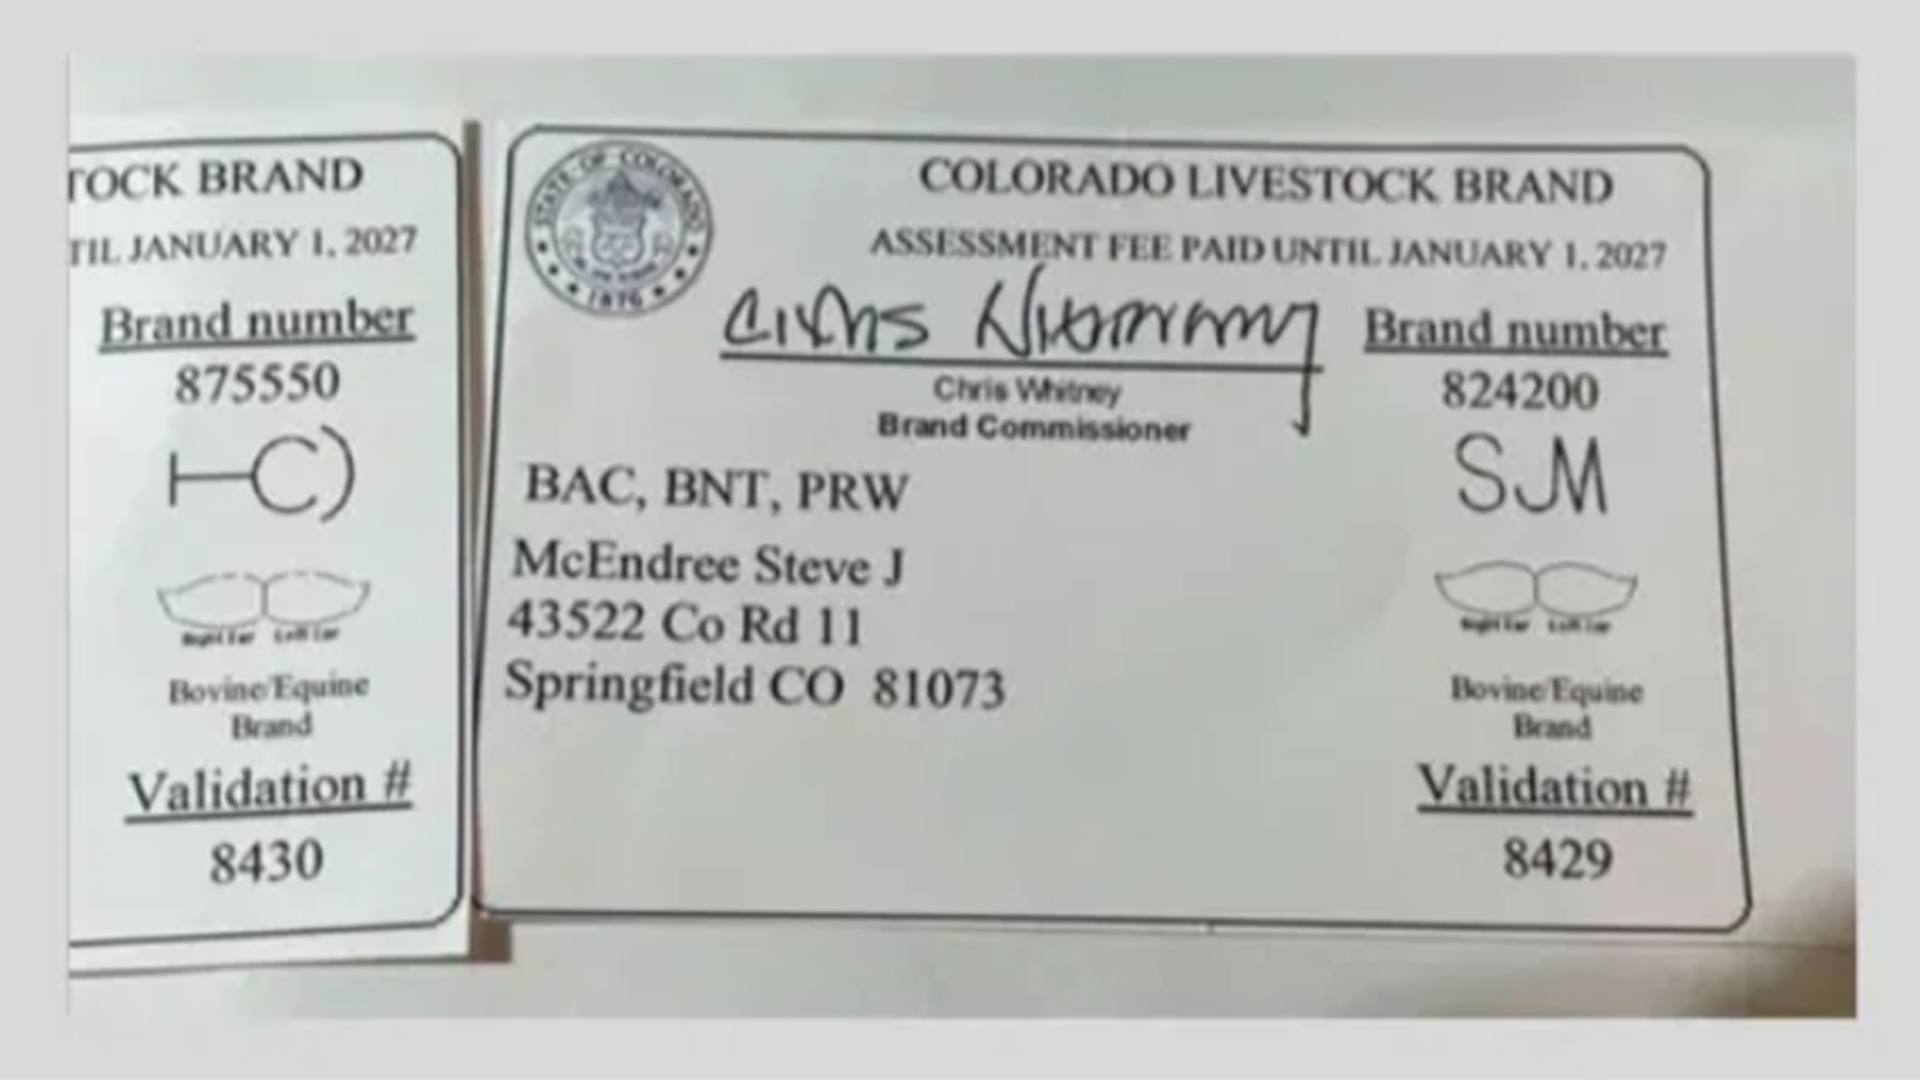 Cattle Rustlers Steal 80 Bred Cows in Baca County, Colorado